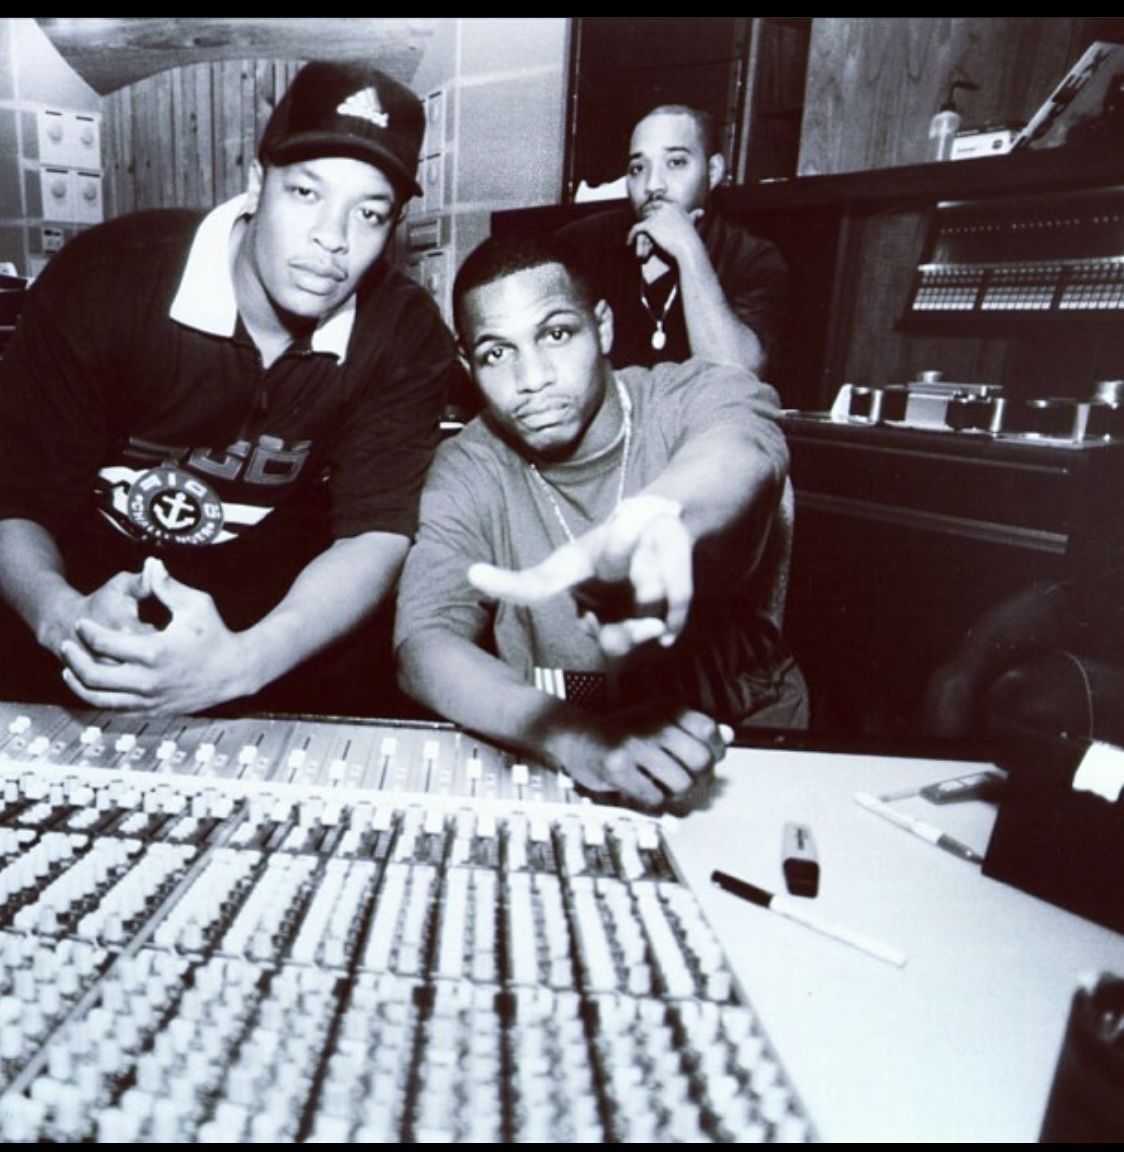 Dr. Dre and AZ, two notable hip hop artists that has shared the struggles of black communities through music, but weren't always the ones handling most of the generated profit. Photo by throwbackhiphop's Instagram.